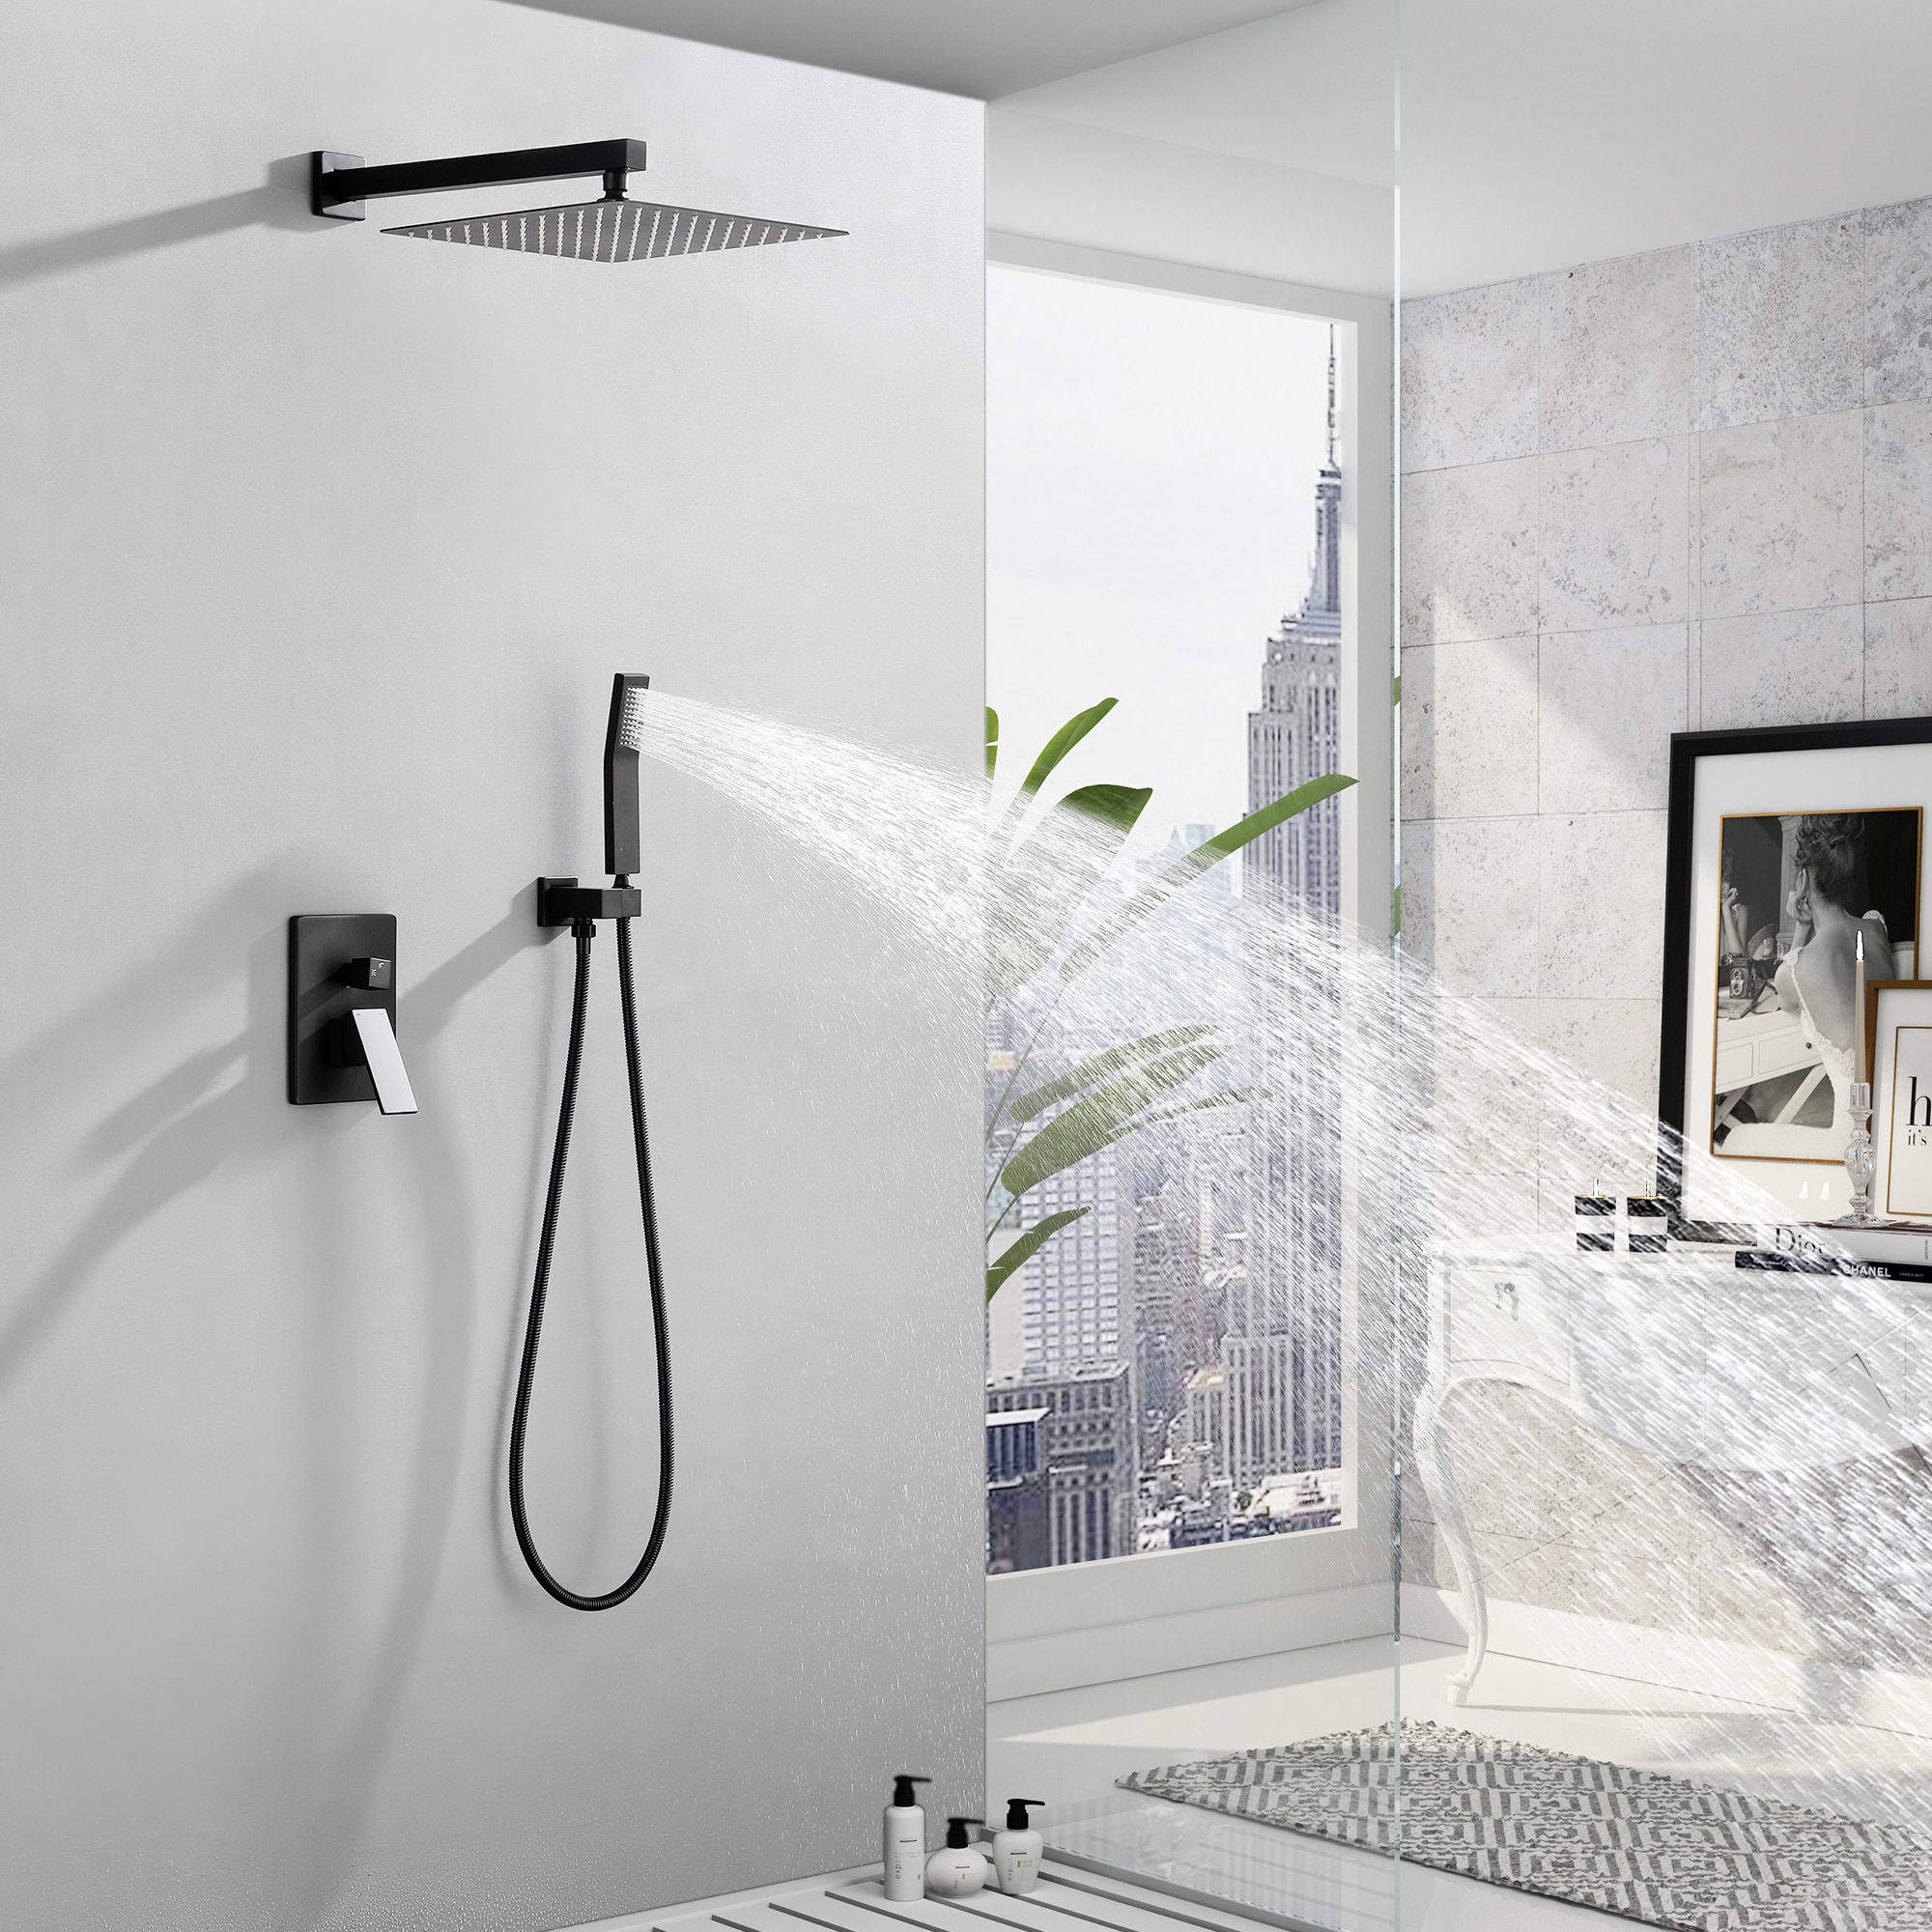 WELLFOR Matte Black Dual Head Waterfall Built-In Shower Faucet System ...